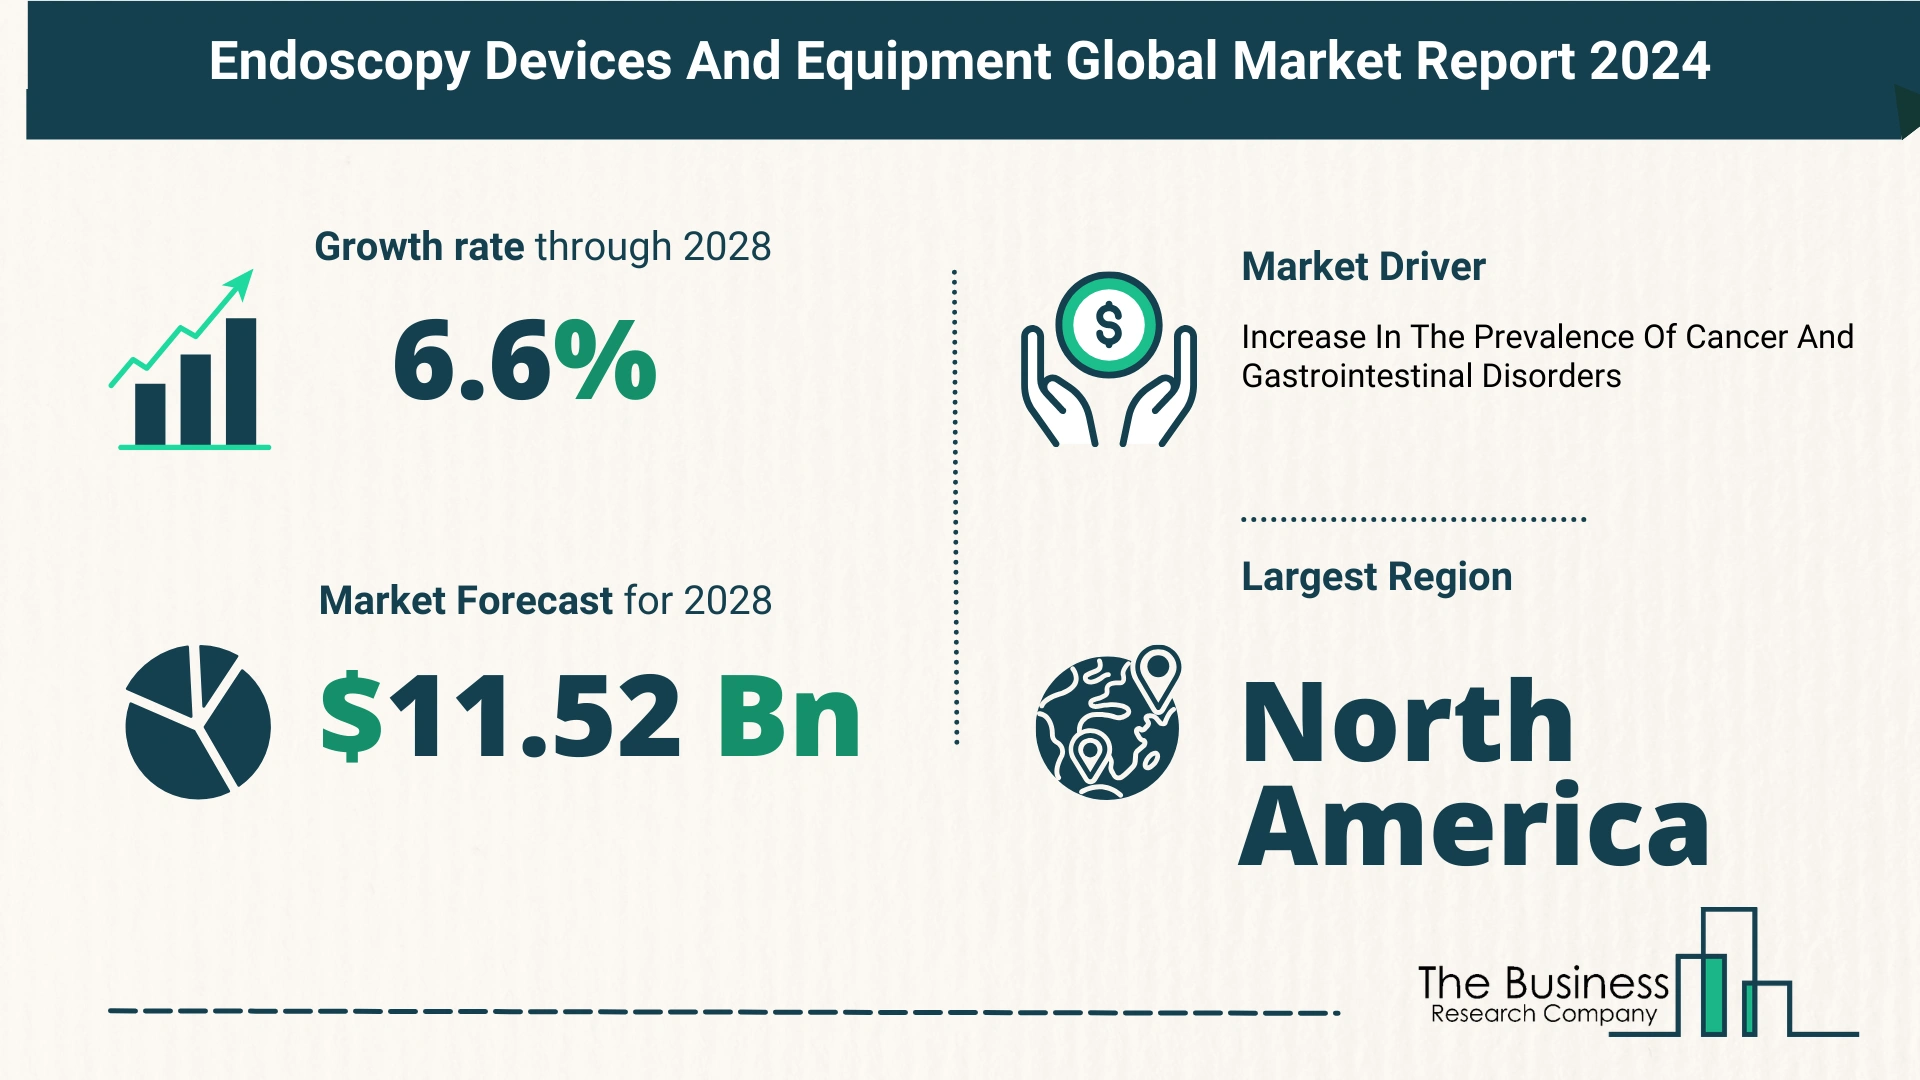 Key Insights On The Endoscopy Devices And Equipment Market 2024 – Size, Driver, And Major Players